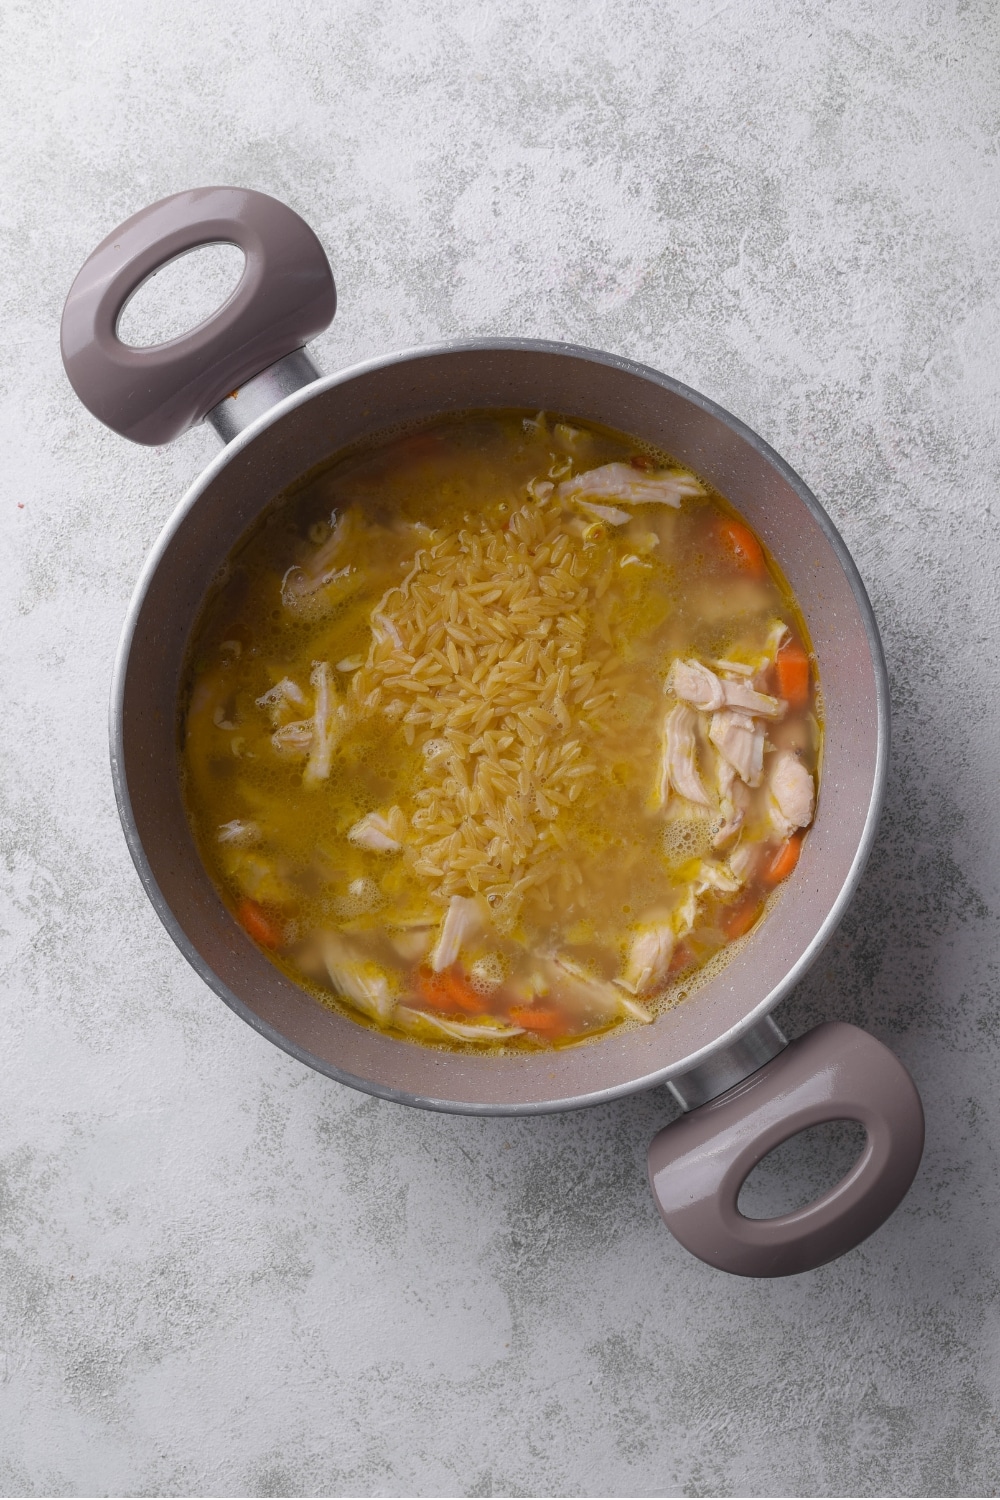 A large pot with shredded chicken, carrots, and orzo pasta cooking in chicken broth.